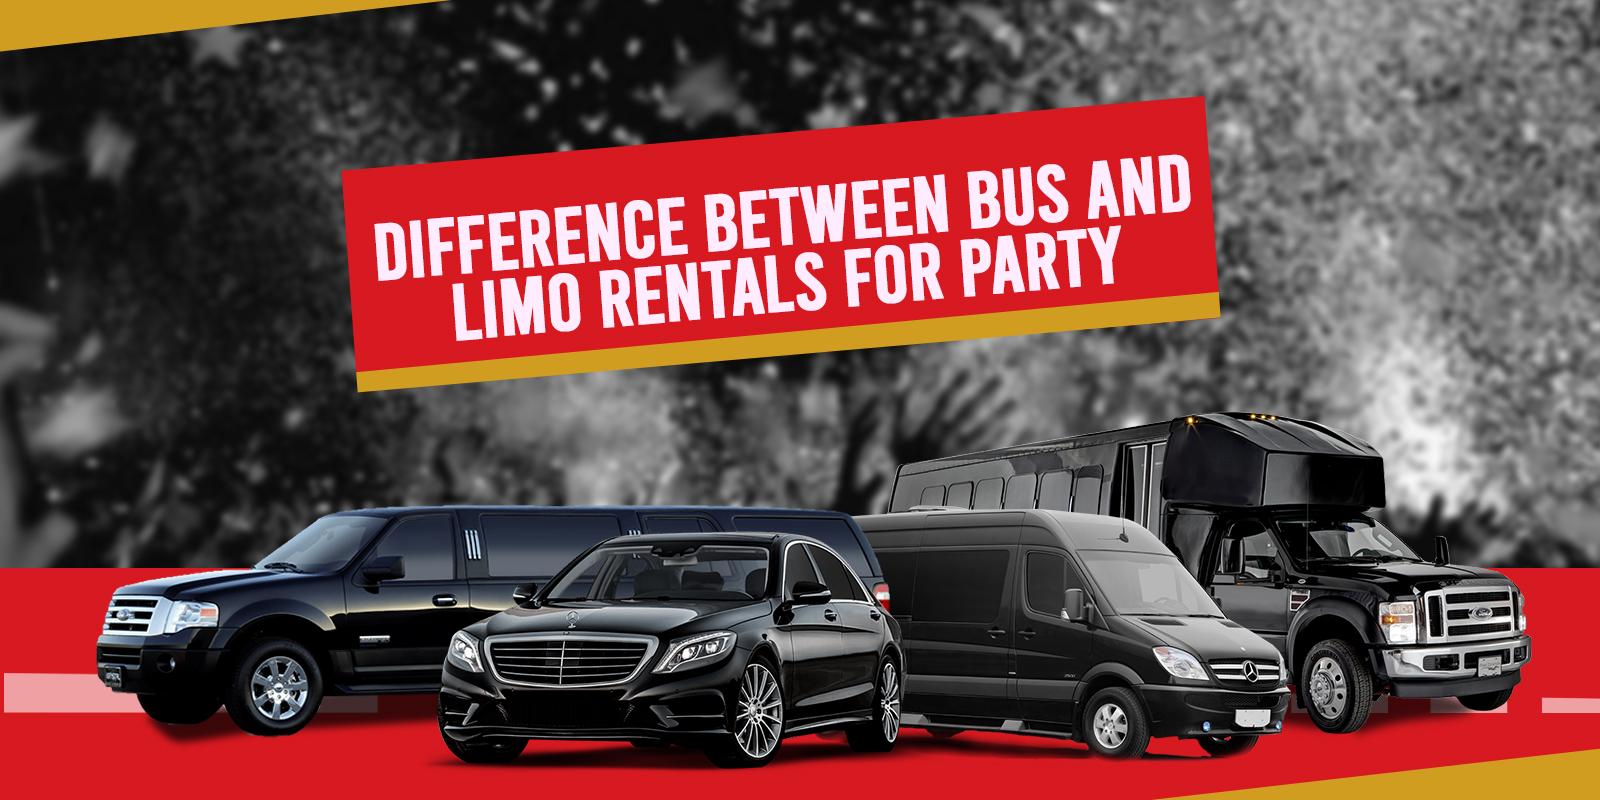 Difference Between Bus and Limo Rentals for Party